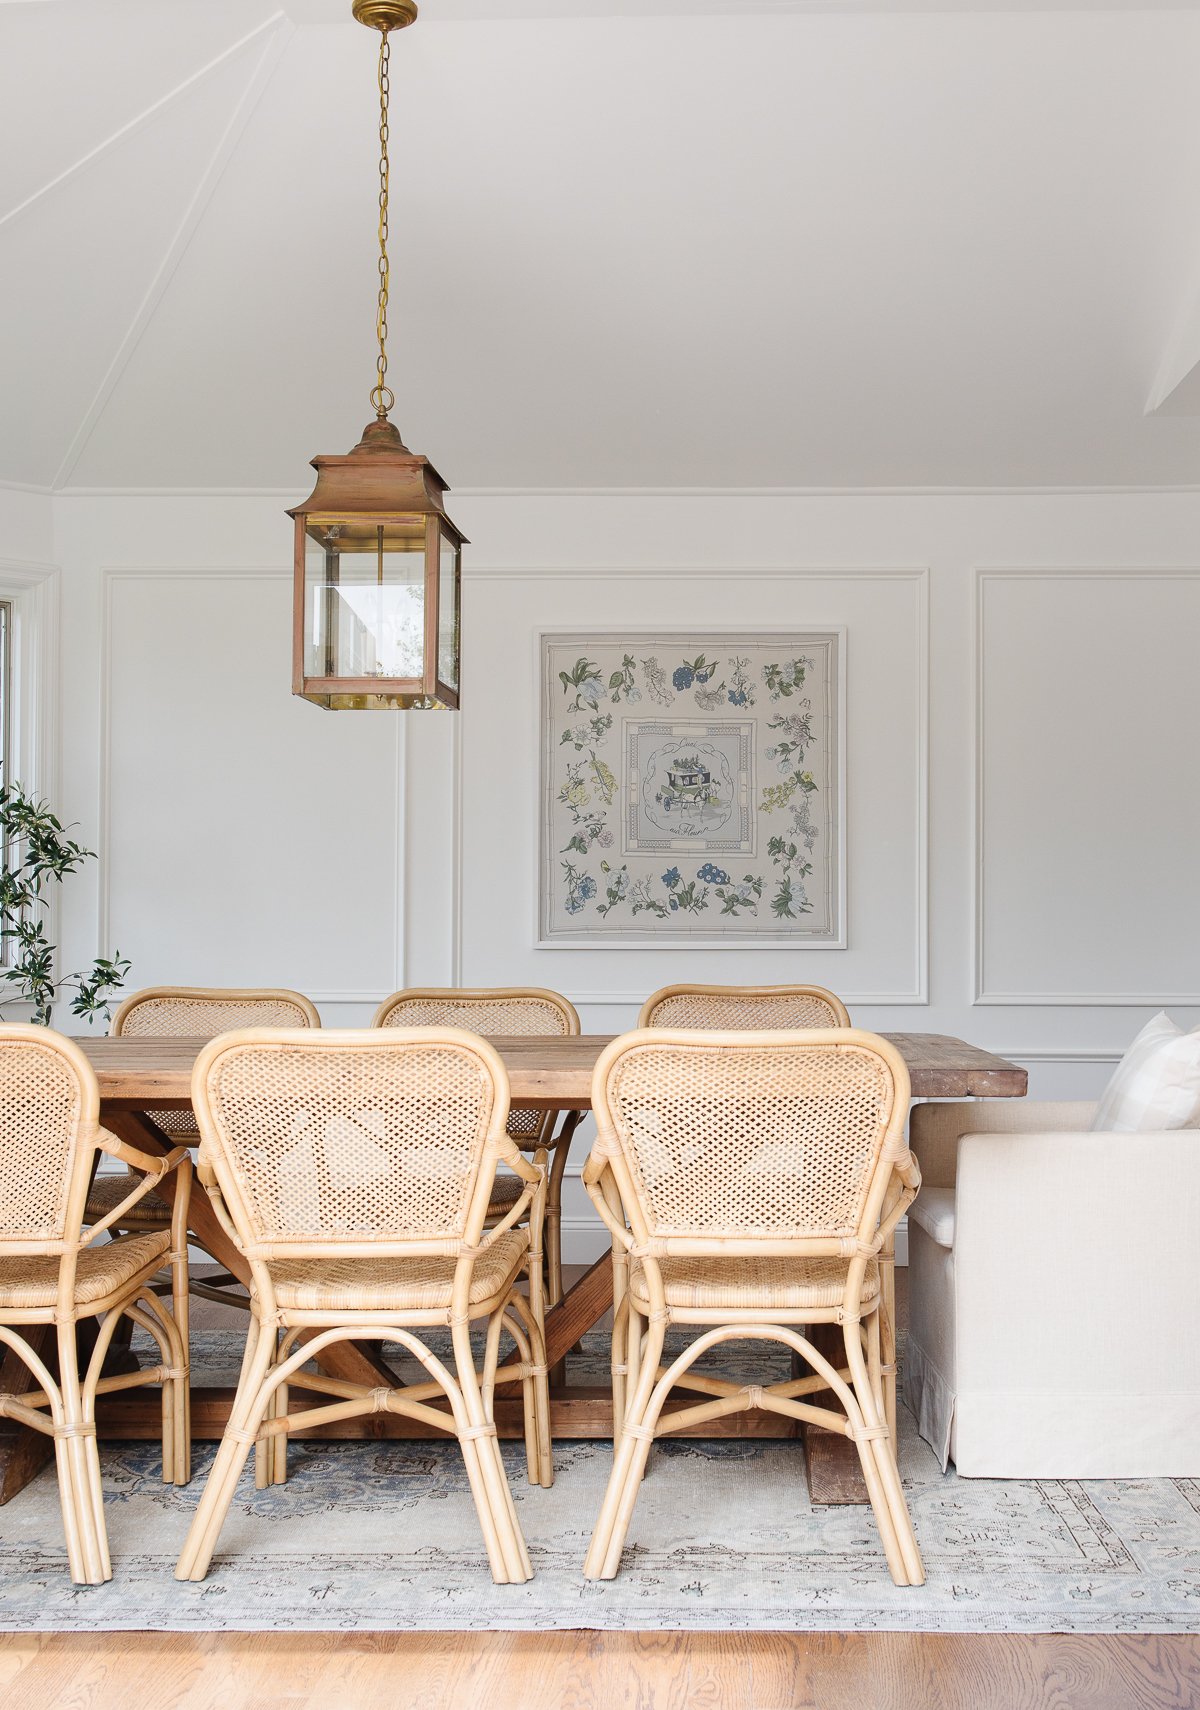 A white painted dining room with rattan chairs